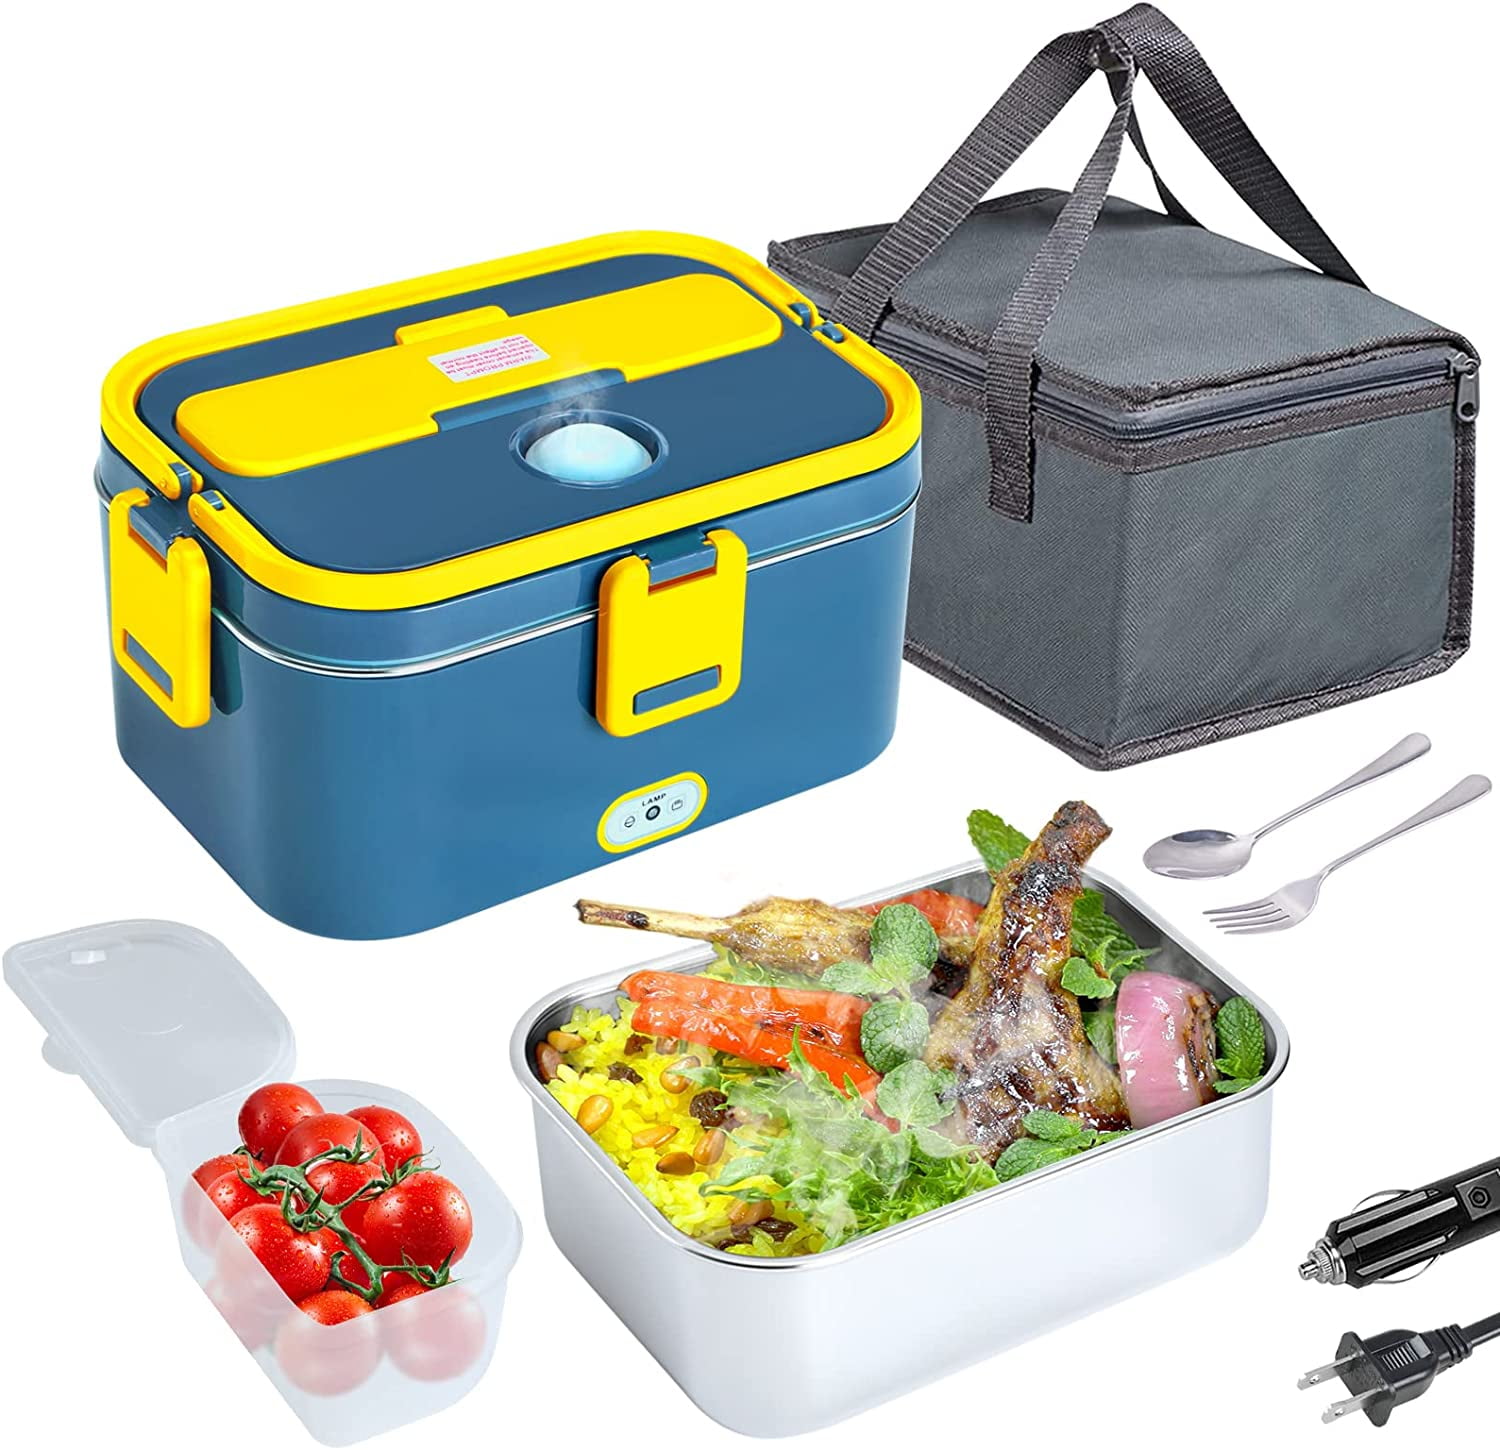 Electric Lunch Box for Car and Home, Work Office - 12V-24V/110V